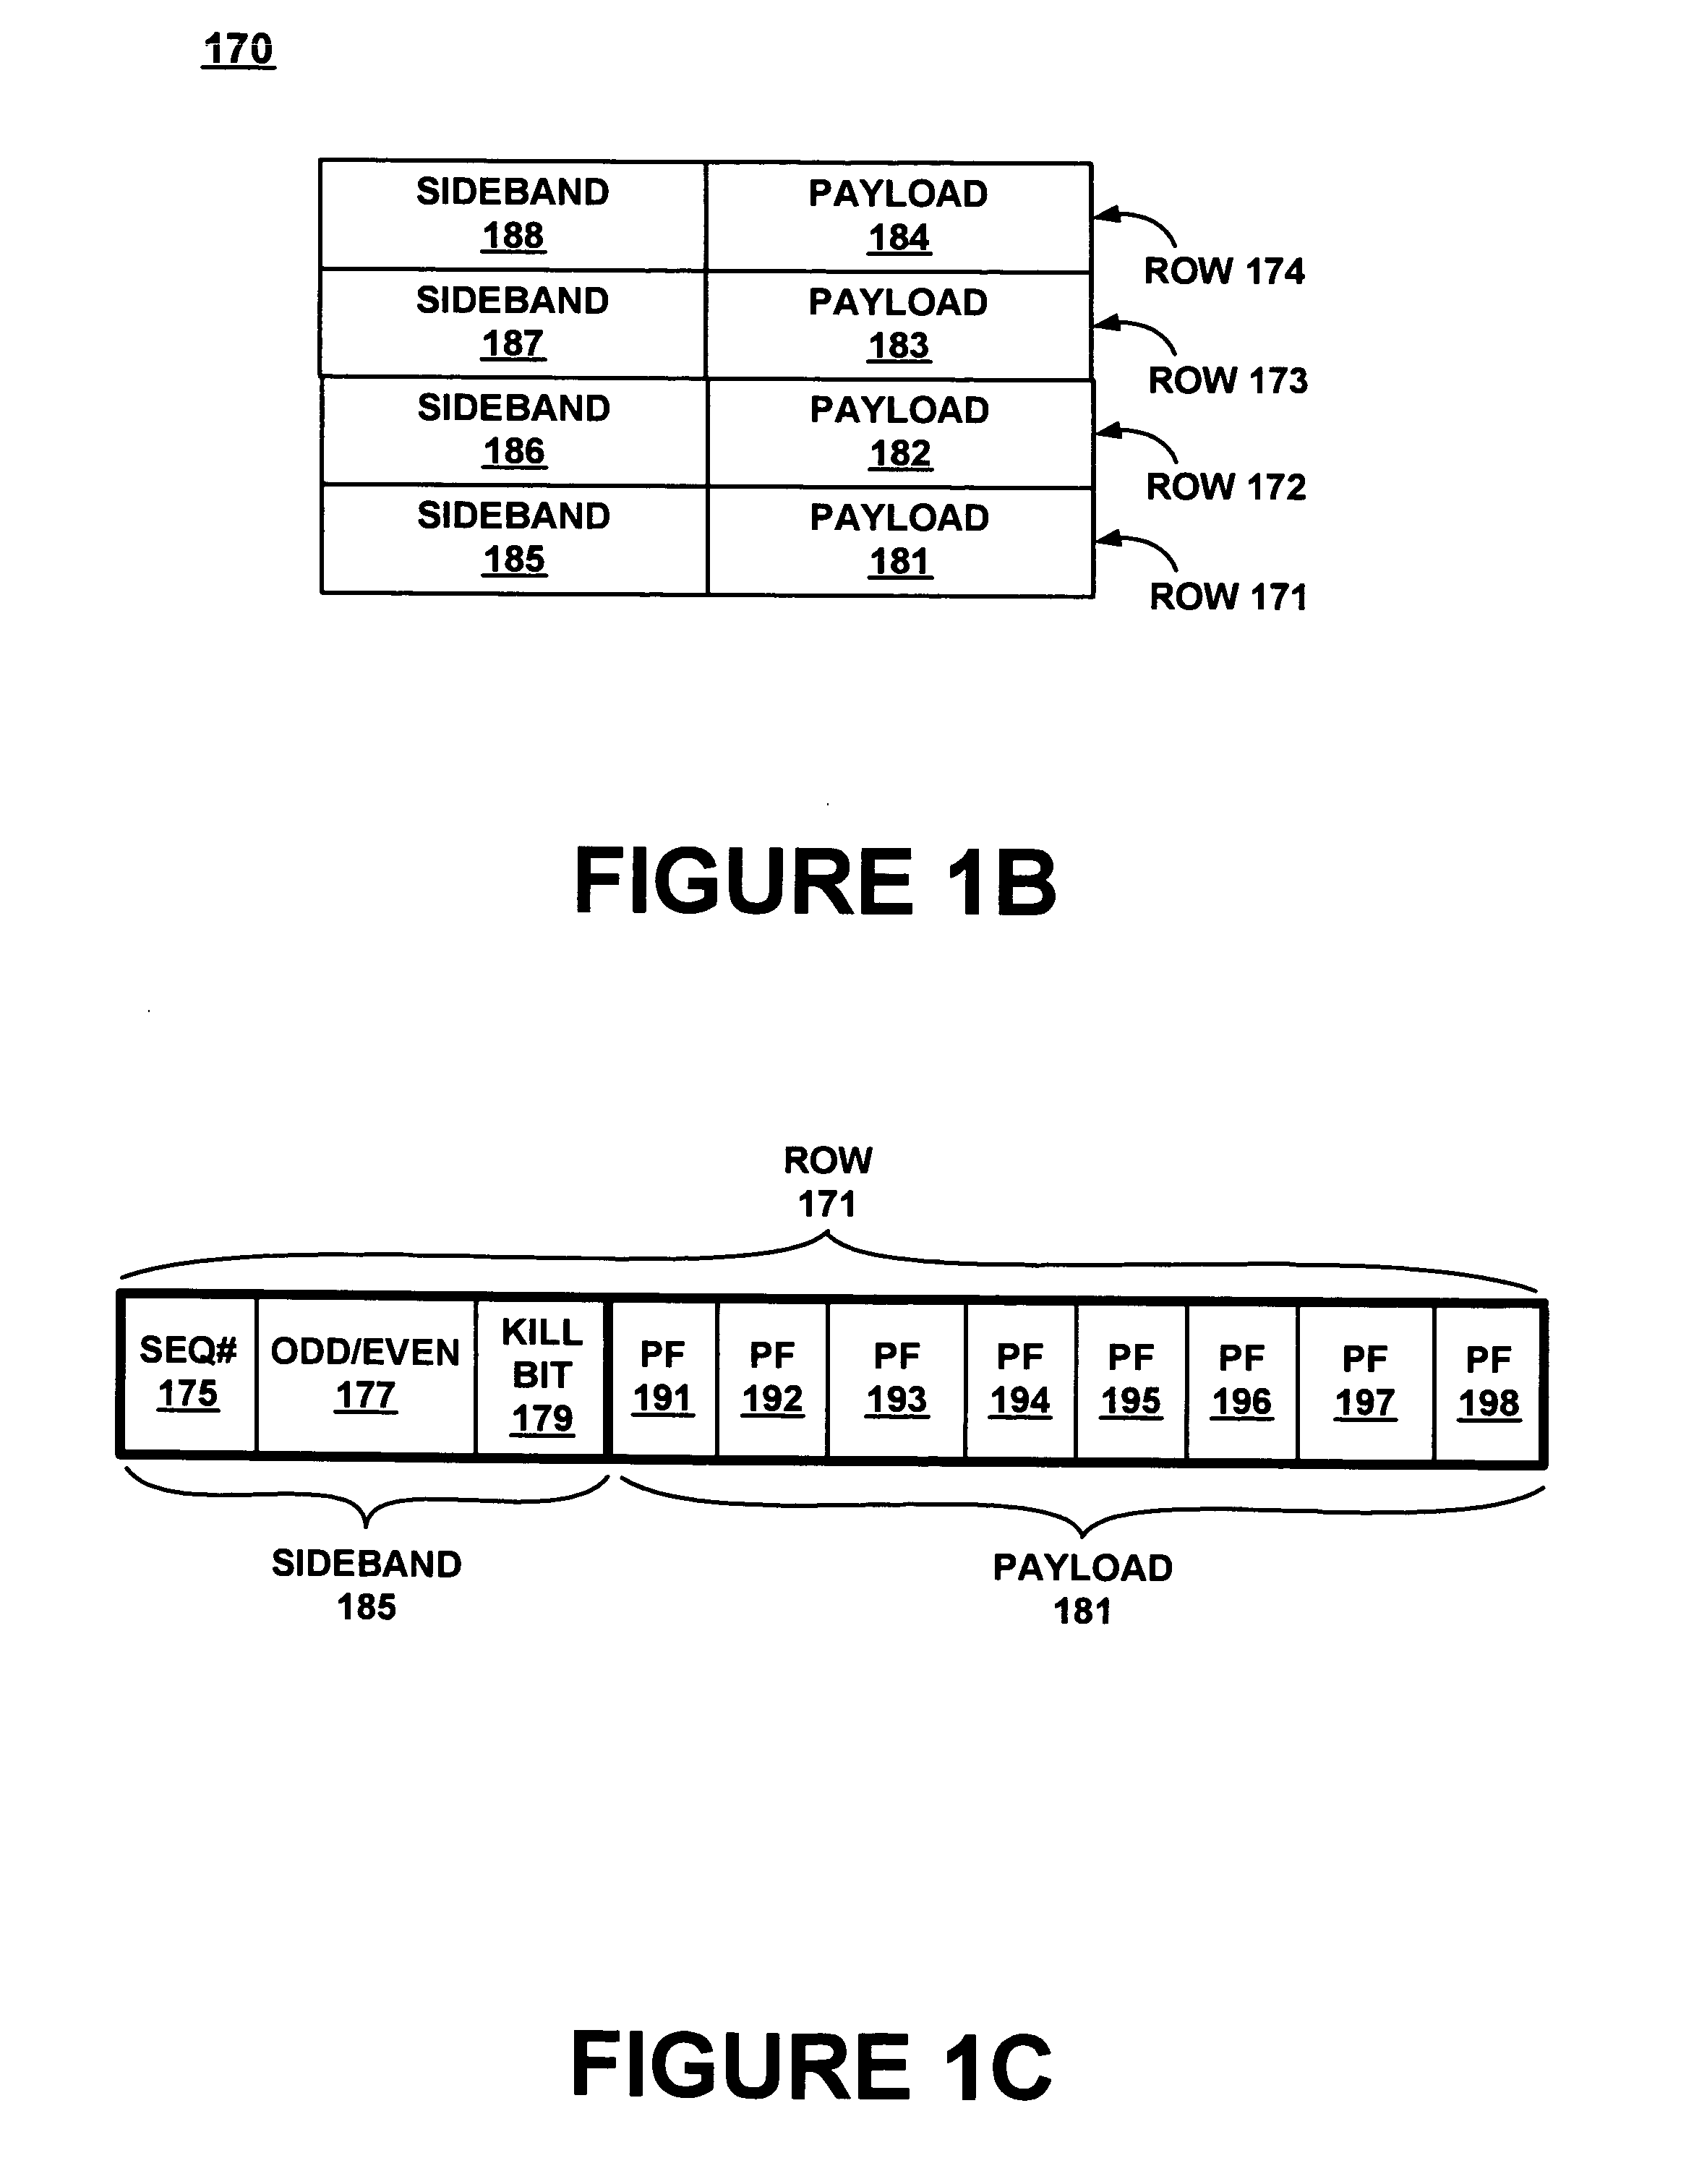 Early kill removal graphics processing system and method